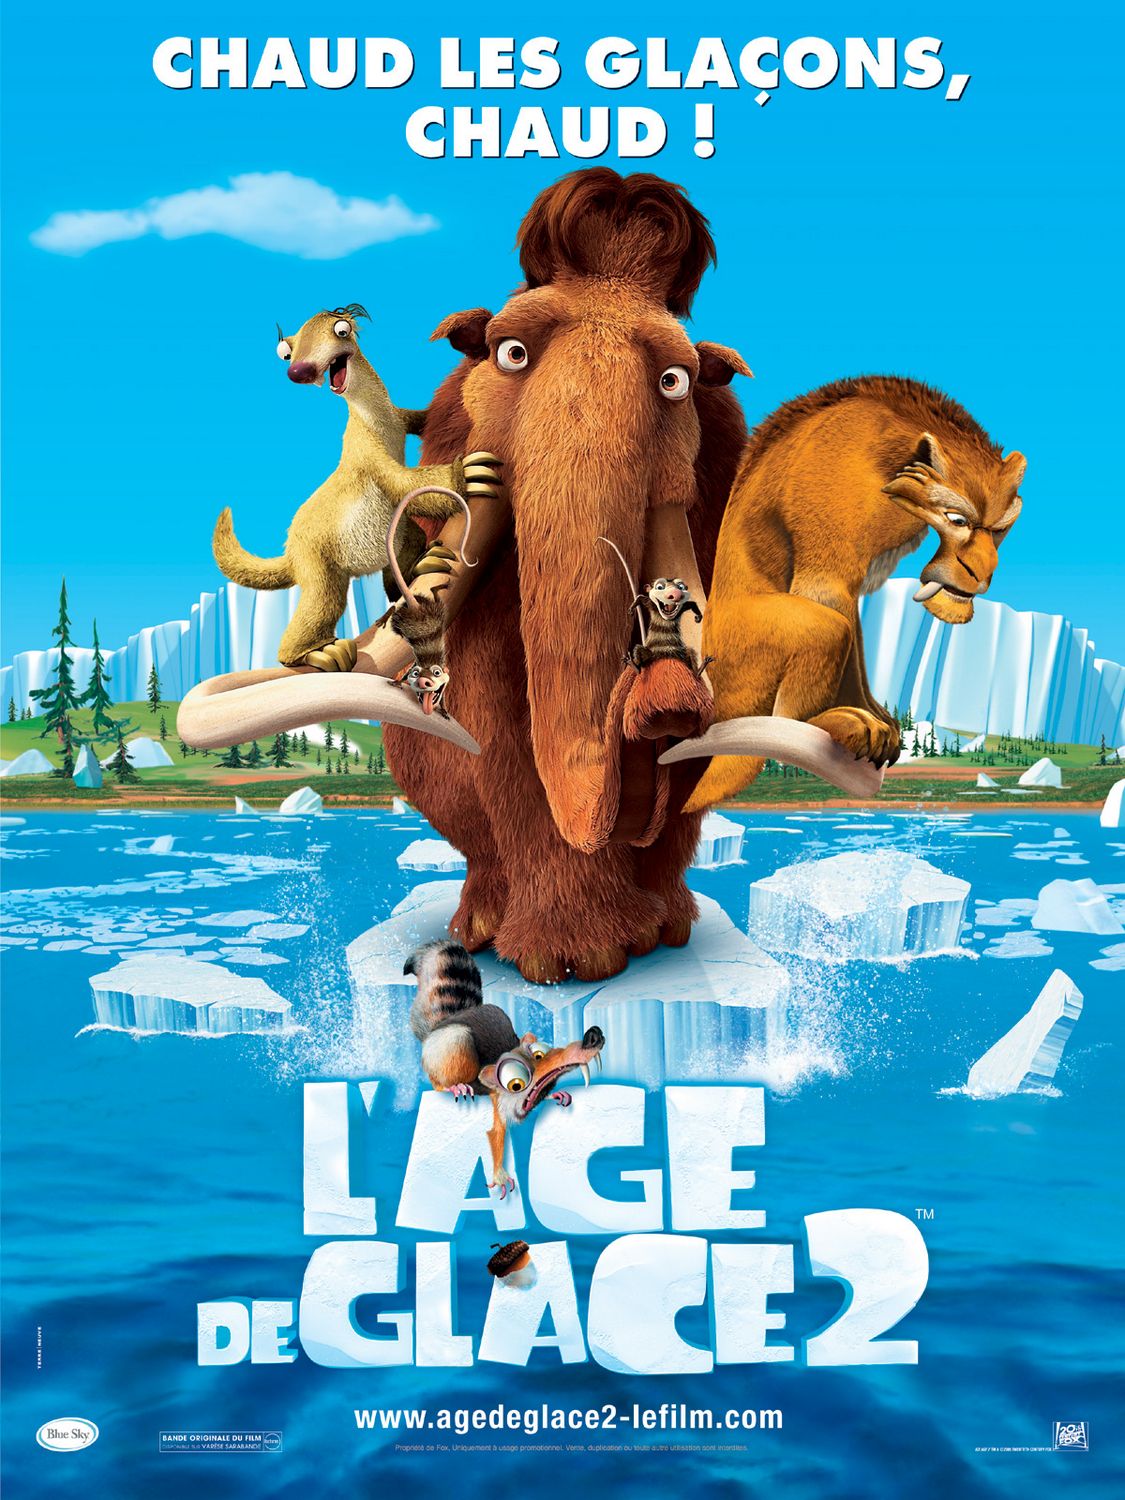 ice age 2 the meltdown movie poster